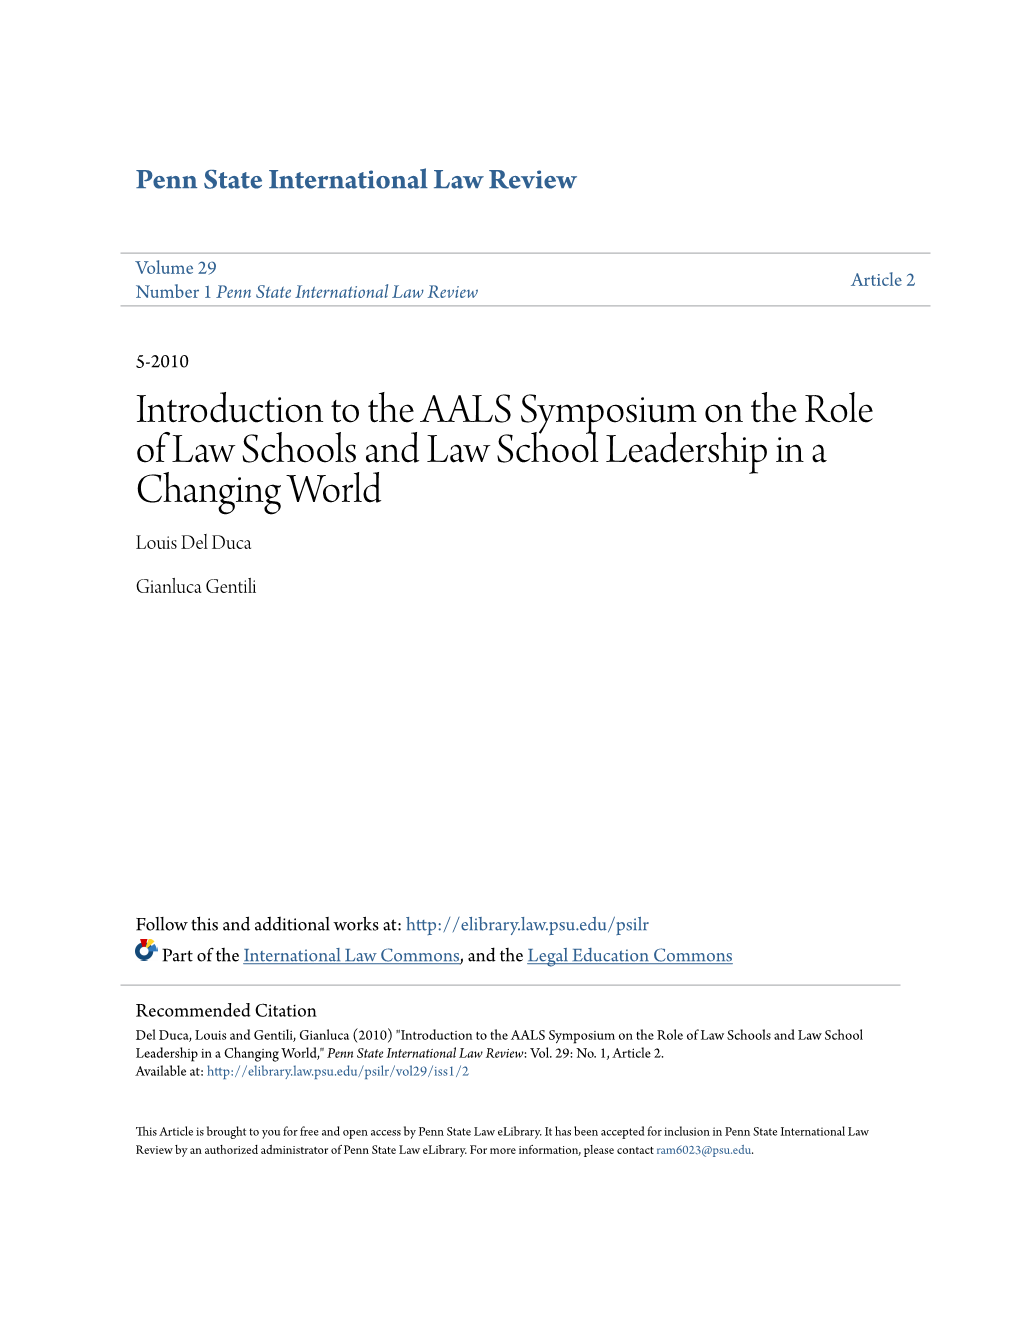 Introduction to the AALS Symposium on the Role of Law Schools and Law School Leadership in a Changing World Louis Del Duca